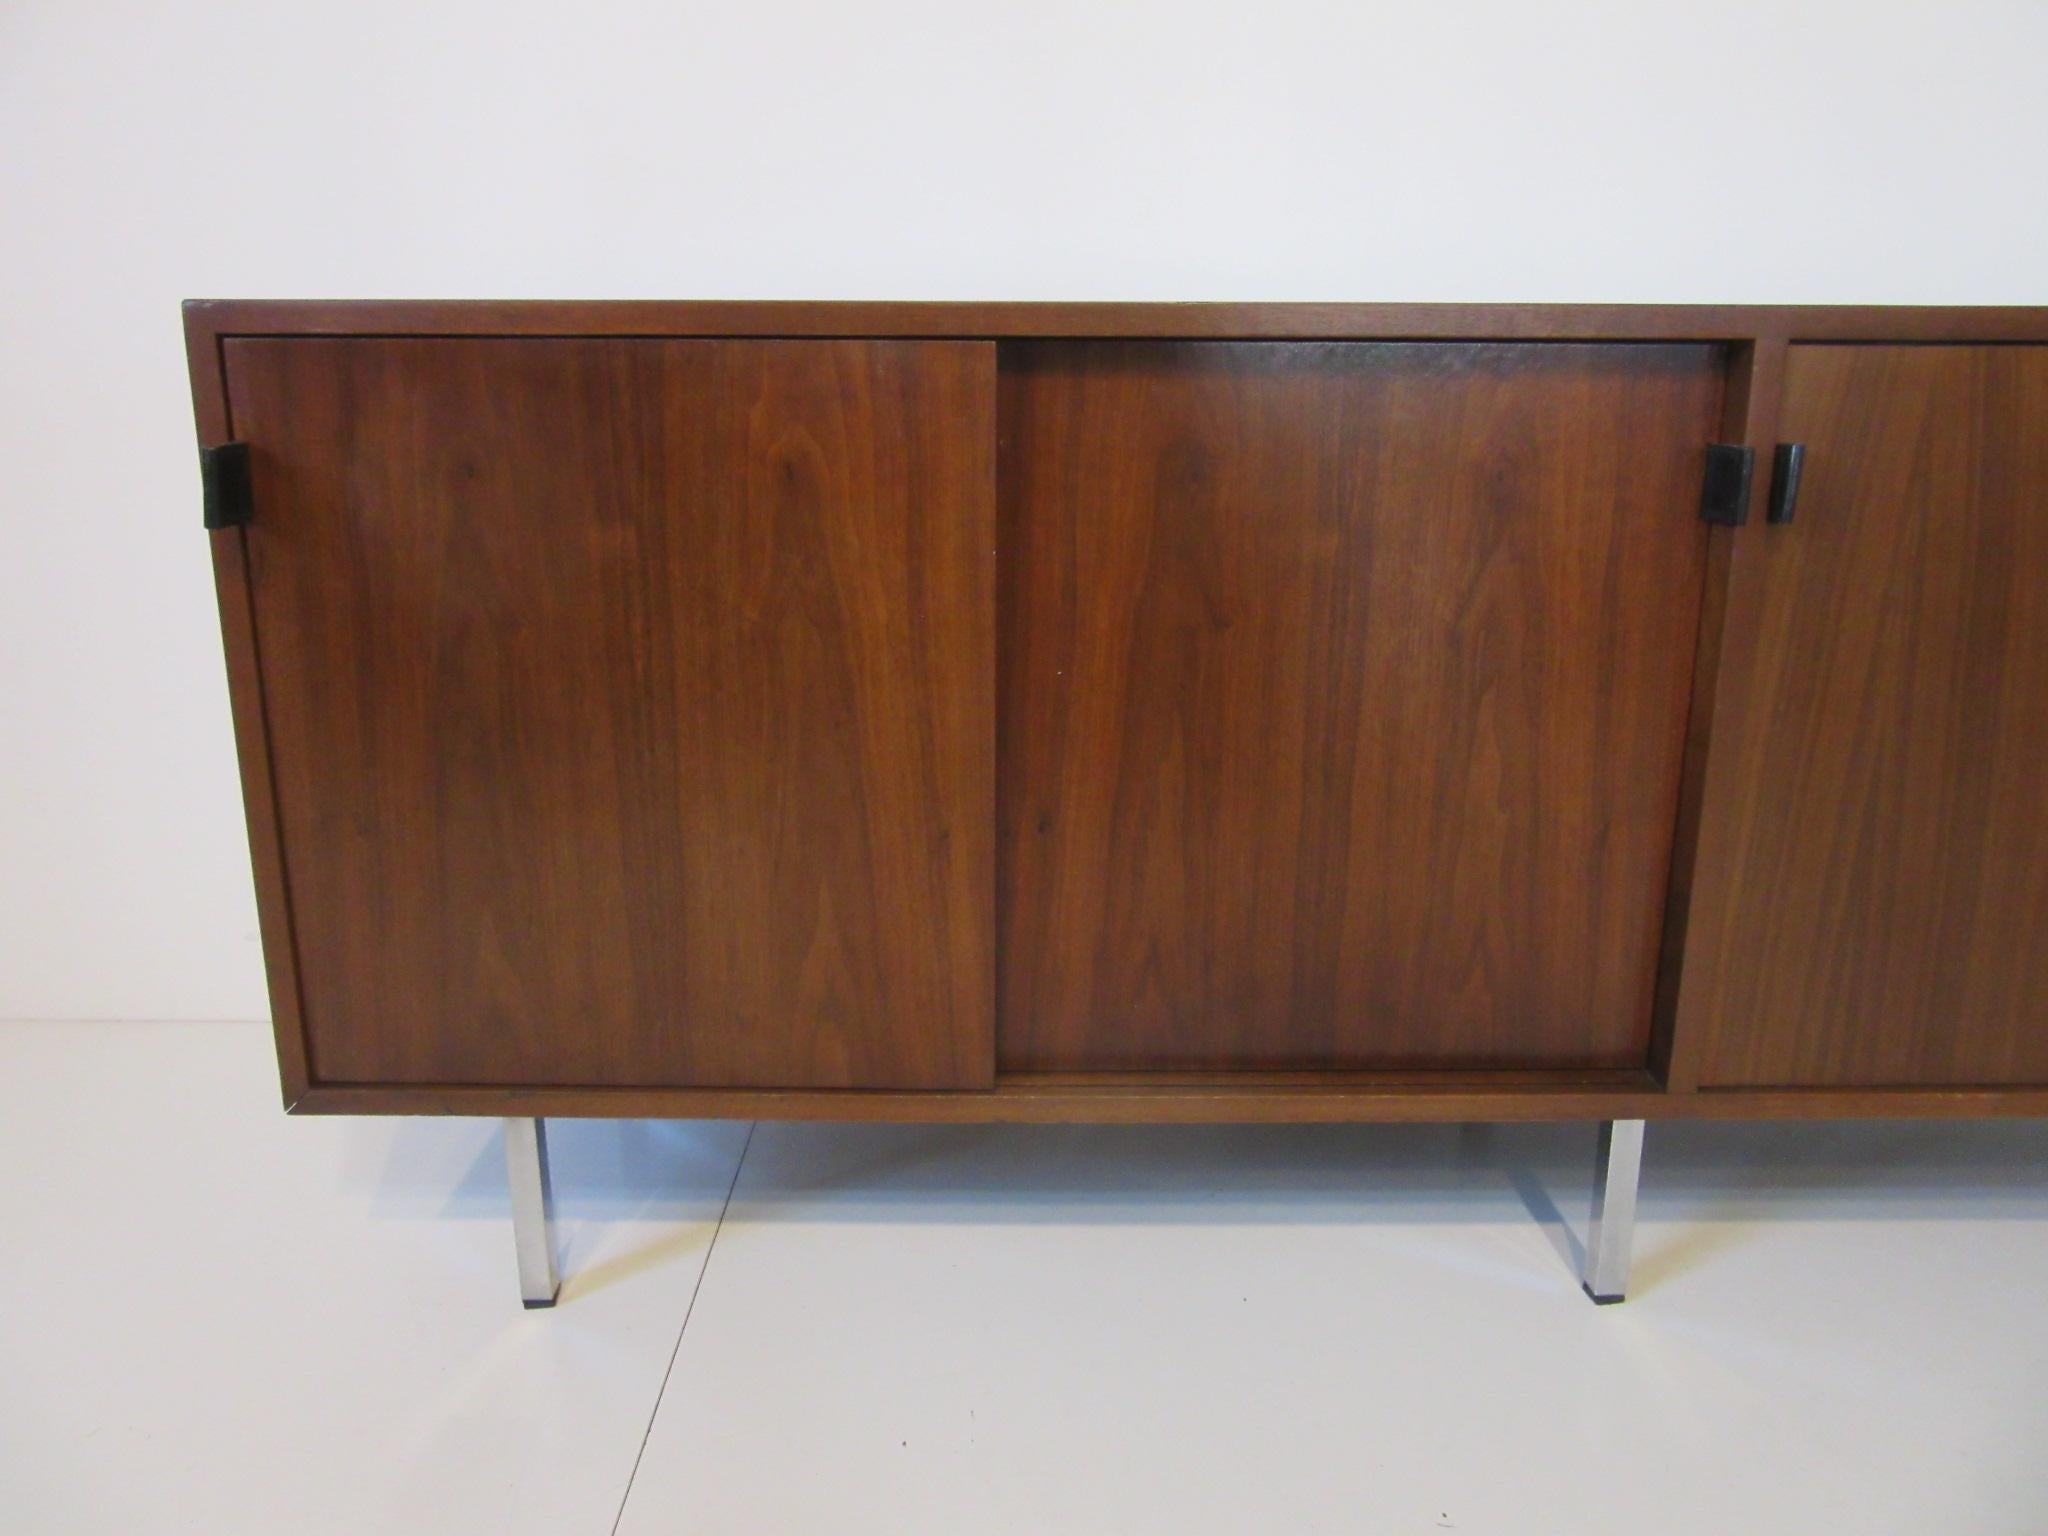 A well-constructed dark walnut credenza with four sliding doors, black leather pulls, two storage areas and two areas with adjustable shelves sitting on square chromed legs. The inside has a natural oak contrasting finish with painted satin black